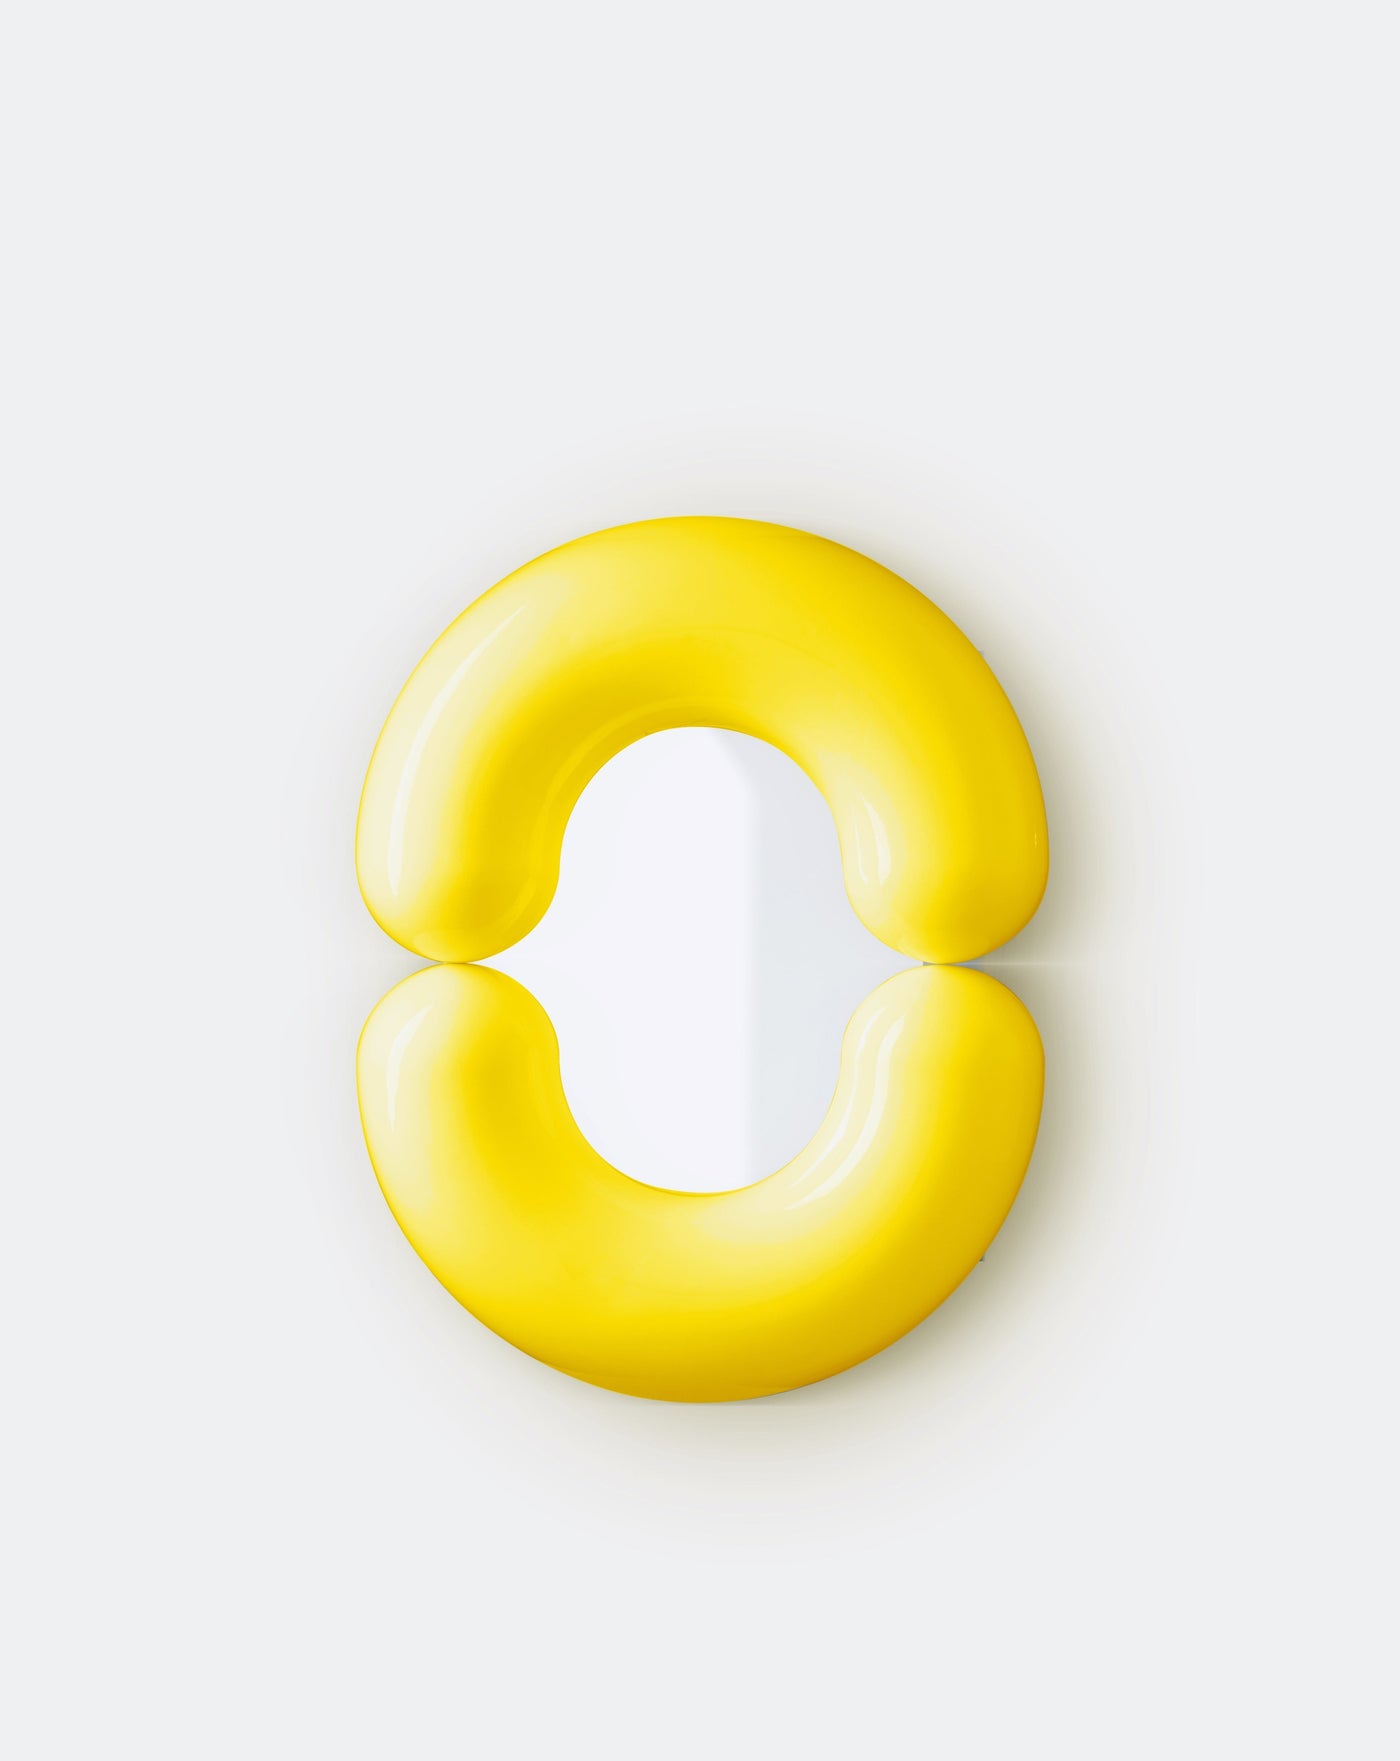 Shop Dessein Parke Yellow Small Zodiac mirror by Jean-Baptiste Fastrez for Moustache Editions The Zodiac mirror by Jean-Baptiste Fastrez plays with its mirror surface to complete the « sausage » it is made of. Seemingly inflated and made of ultra glossy ceramic to echo the inflatable boat that is its namesake, the Zodiac mirror frame looks full thanks to a symmetrical mirror image of half a ring into the mirror.